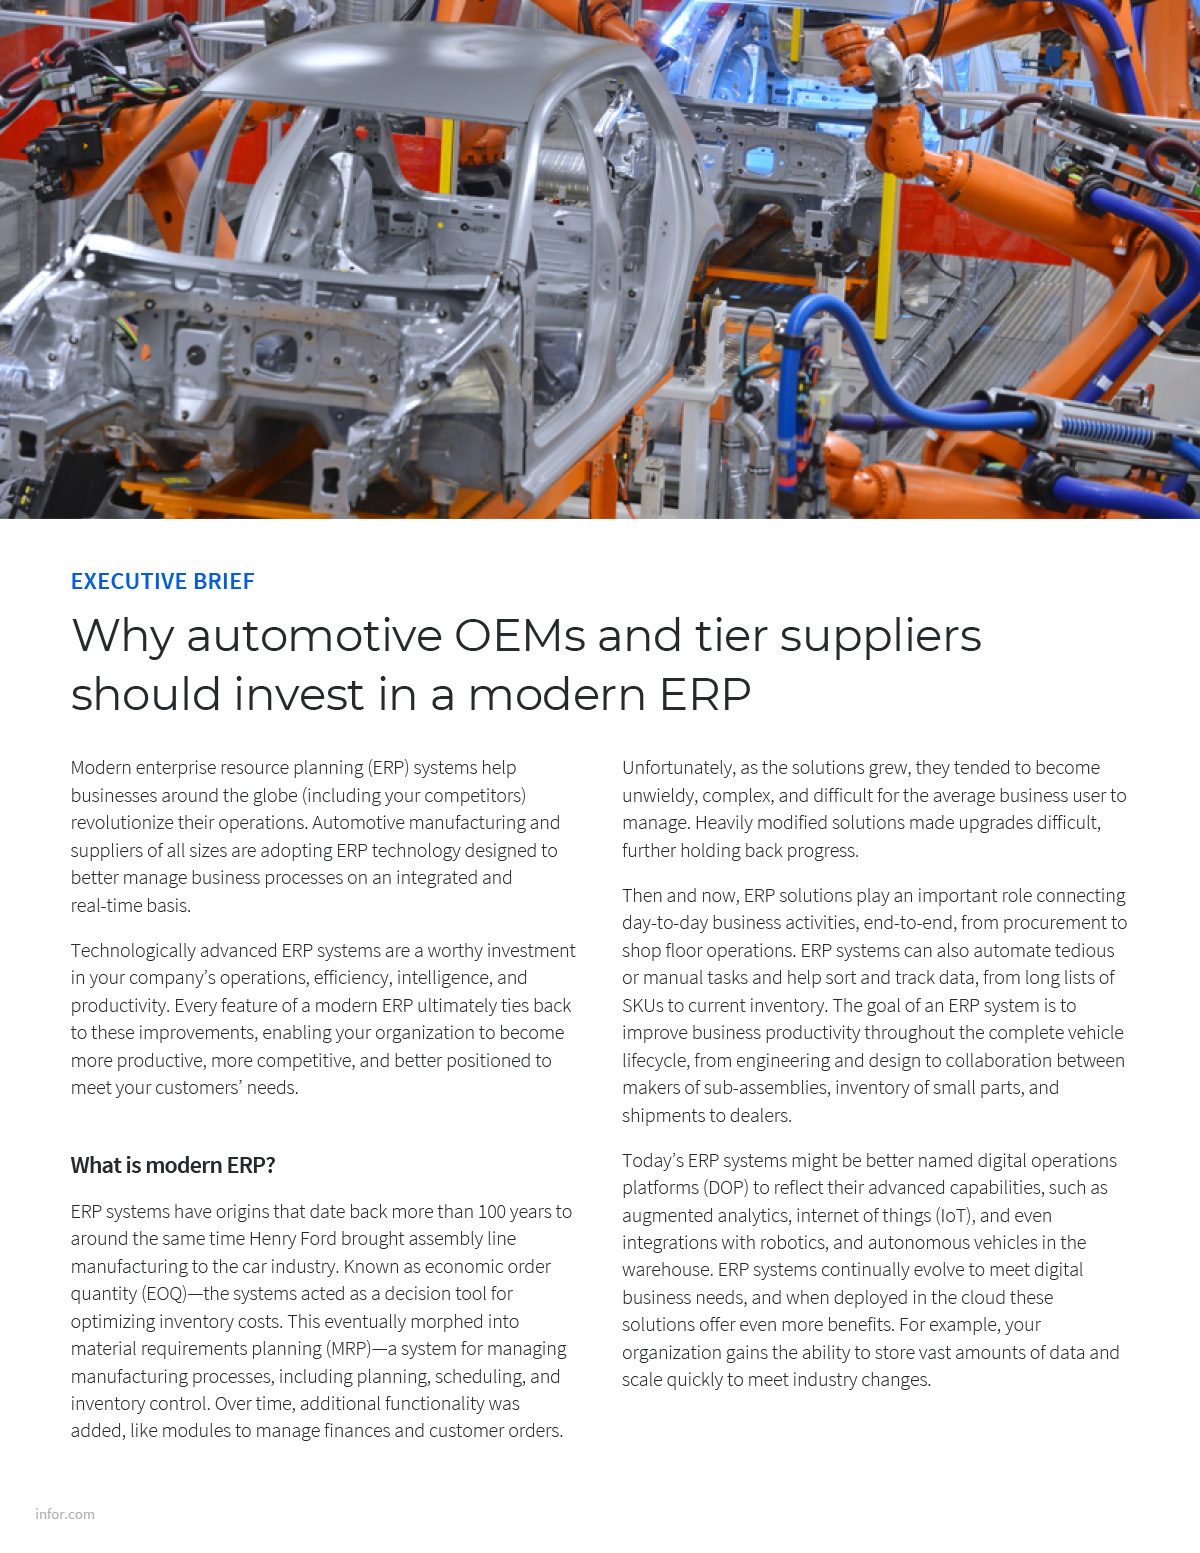 Why Automotive OEMs and Tier Suppliers Should Invest in a Modern ERP-TN